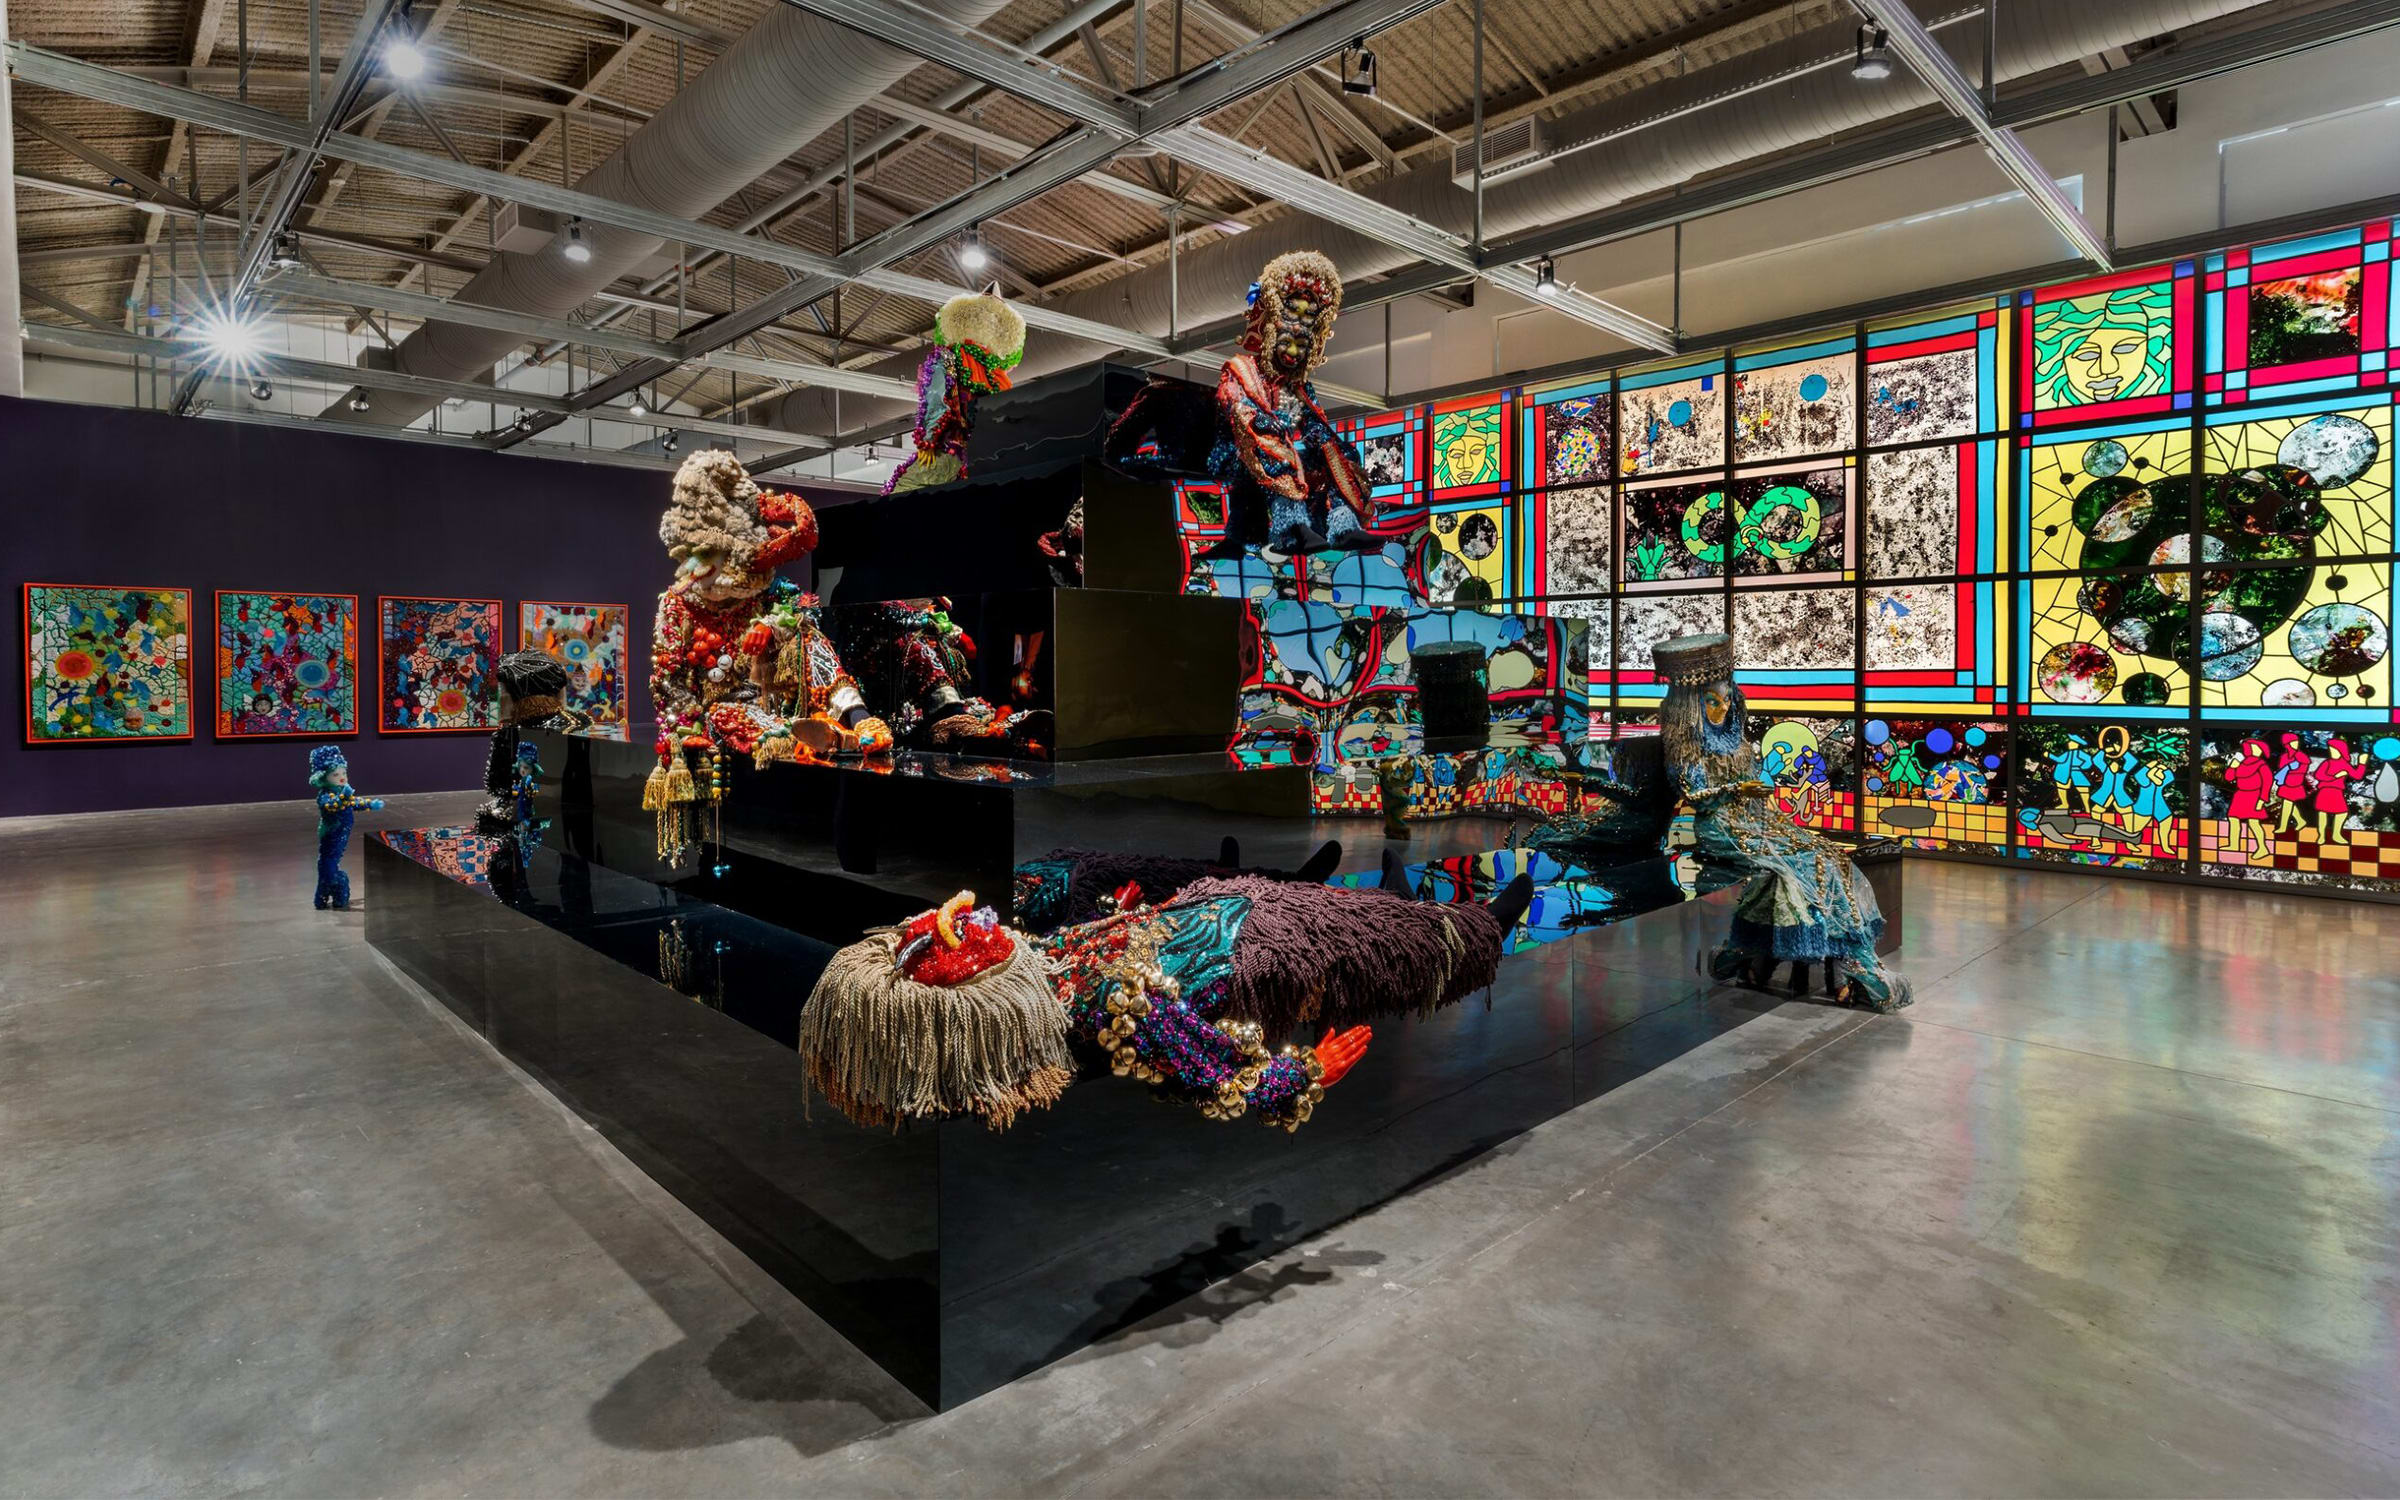 Installation view of ‘Raúl De Nieves: Eternal Return & The Obsidian Heart’ at the Museum of Contemporary Art (MOCA), North Miami. Courtesy of the artist and the Museum of Contemporary Art (MOCA), North Miami.